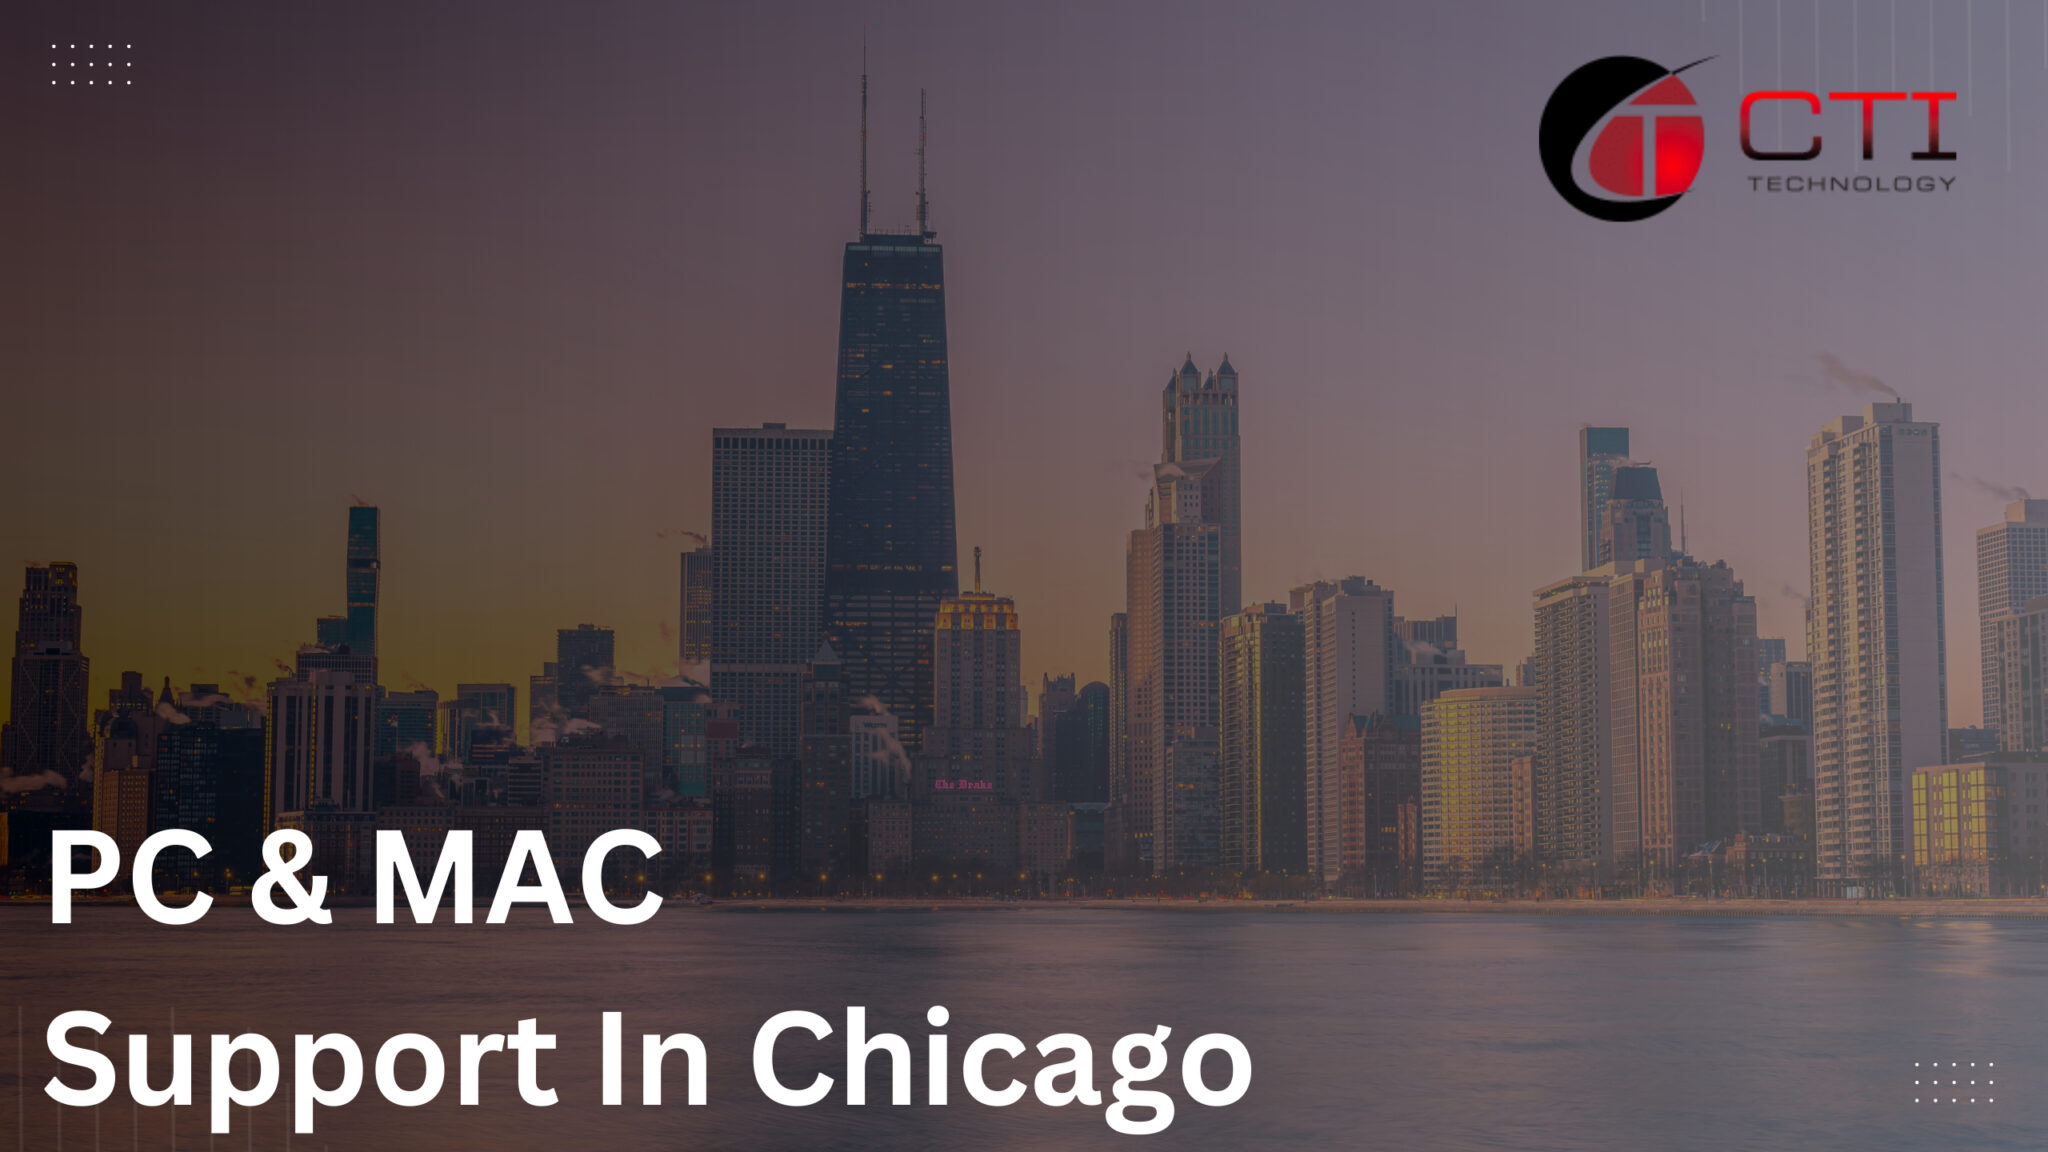 Does Your Chicago IT Company Support PCs and Macs?